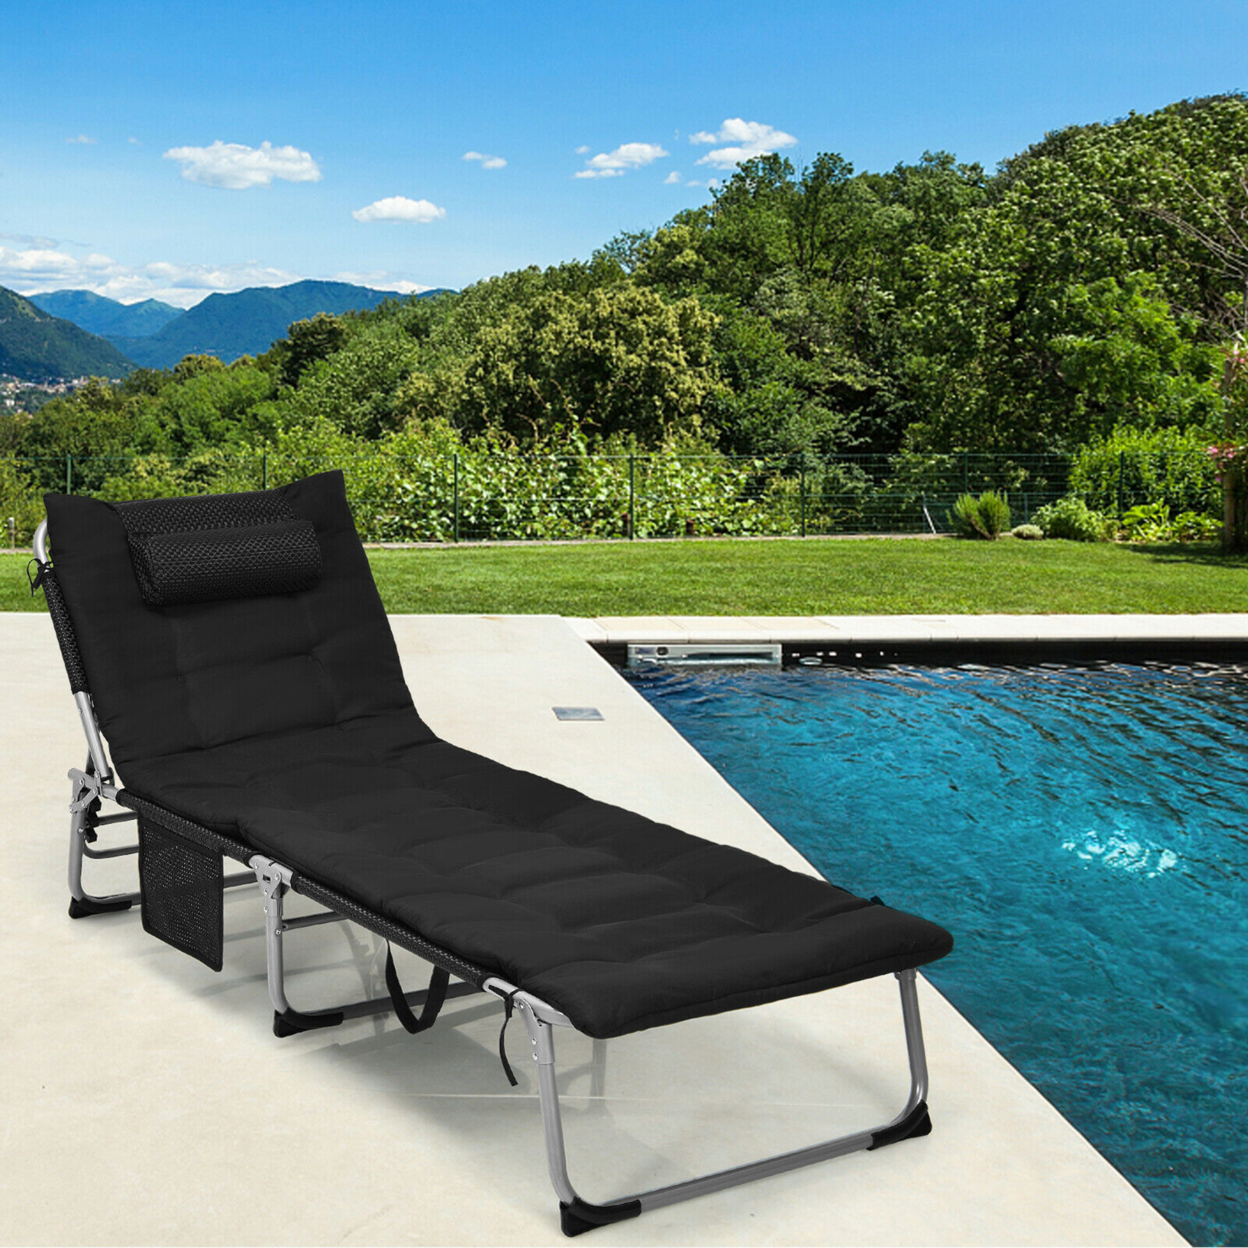 4-Fold Oversize Padded Folding Chaise Lounge Chair Reclining Chair - Black